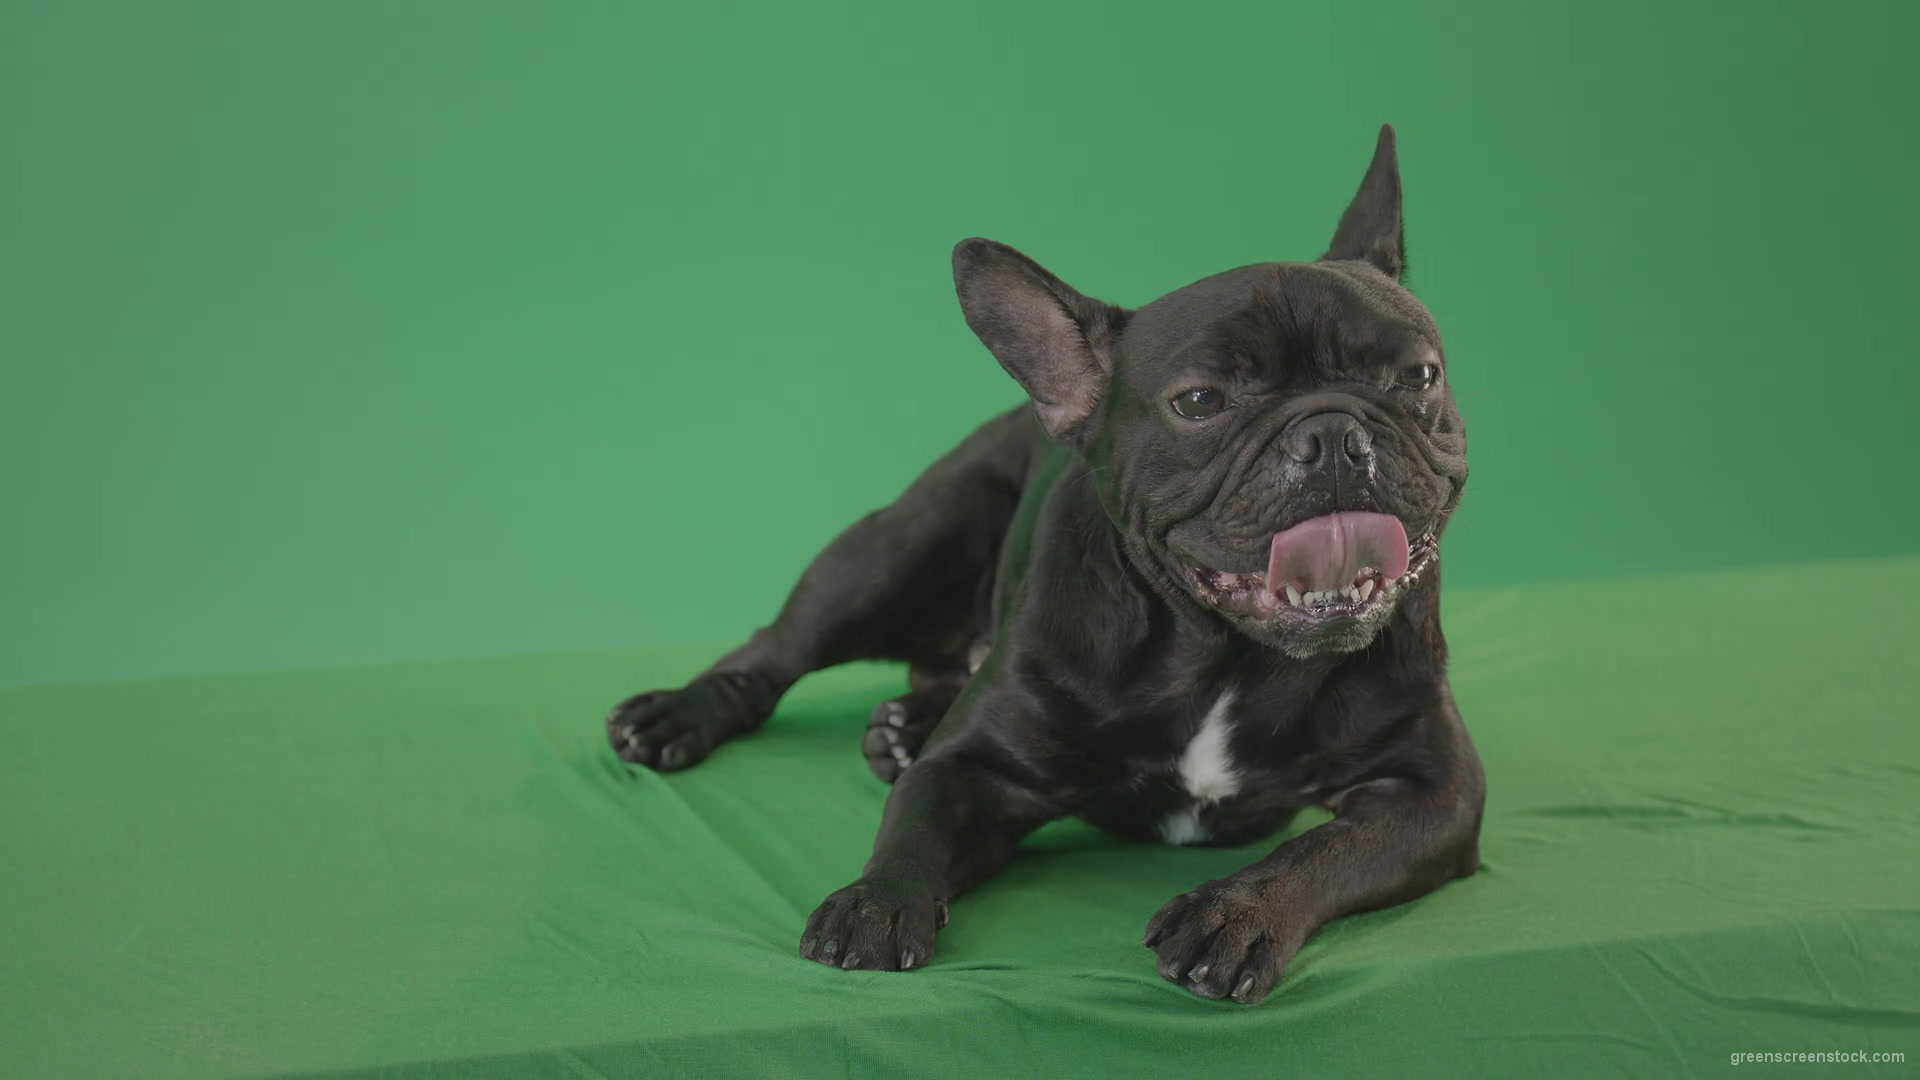 Boring-black-French-Bulldog-chilling-like-a-Bos-on-green-screen-4K-Video-Footage-1920_004 Green Screen Stock